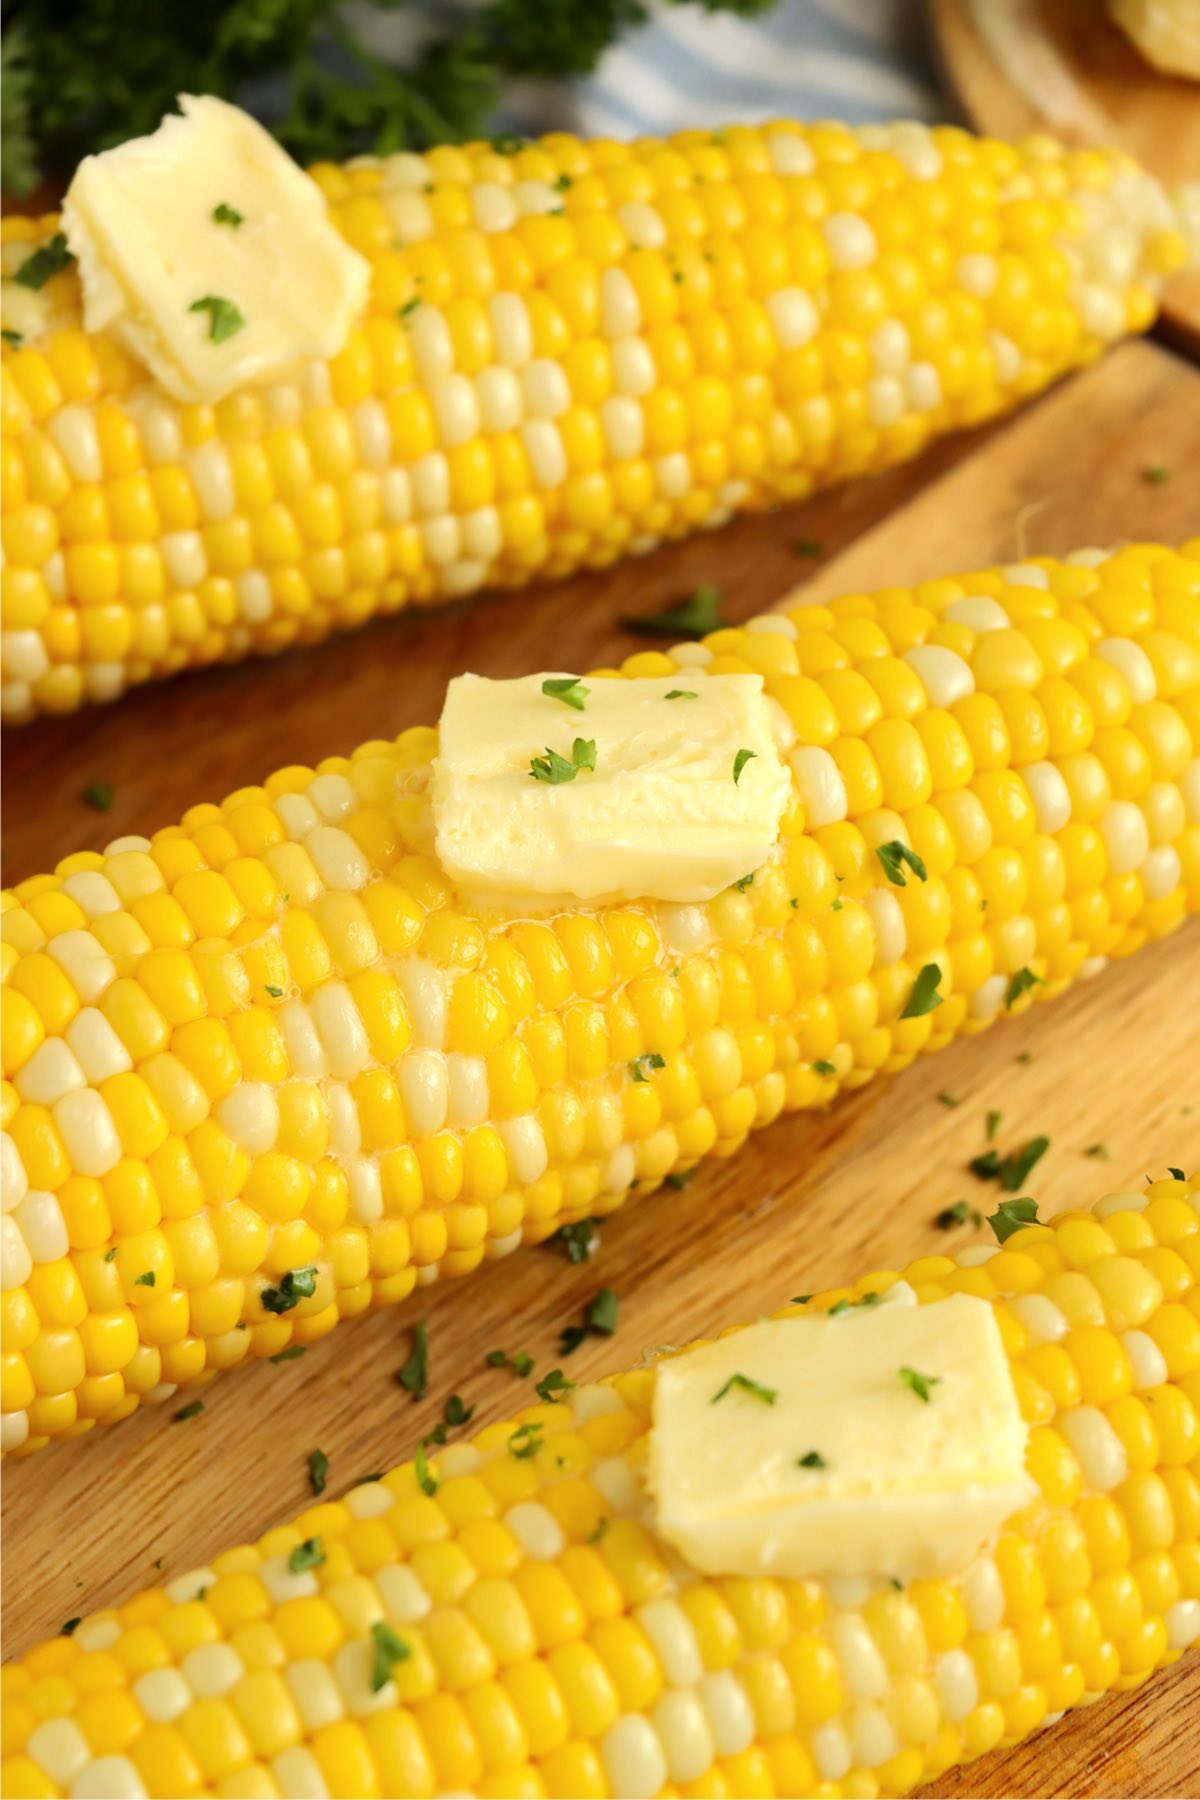 Pats of butter on cooked corn